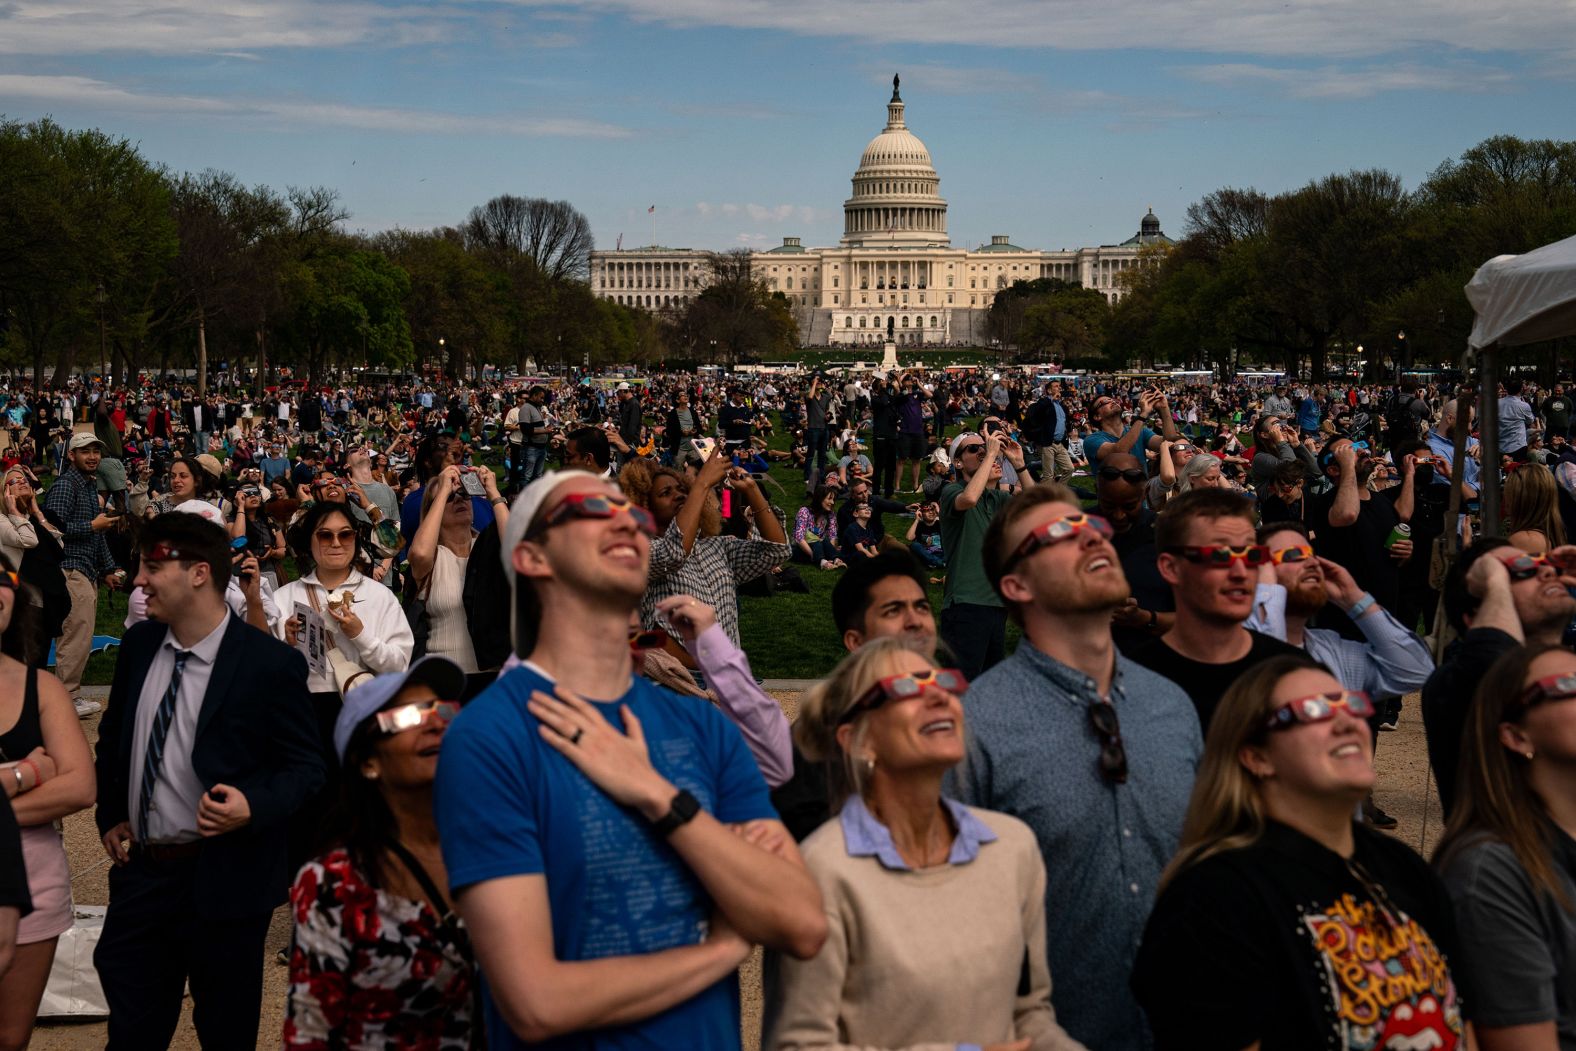 People gather on the National Mall in Washington, DC, to view the eclipse.